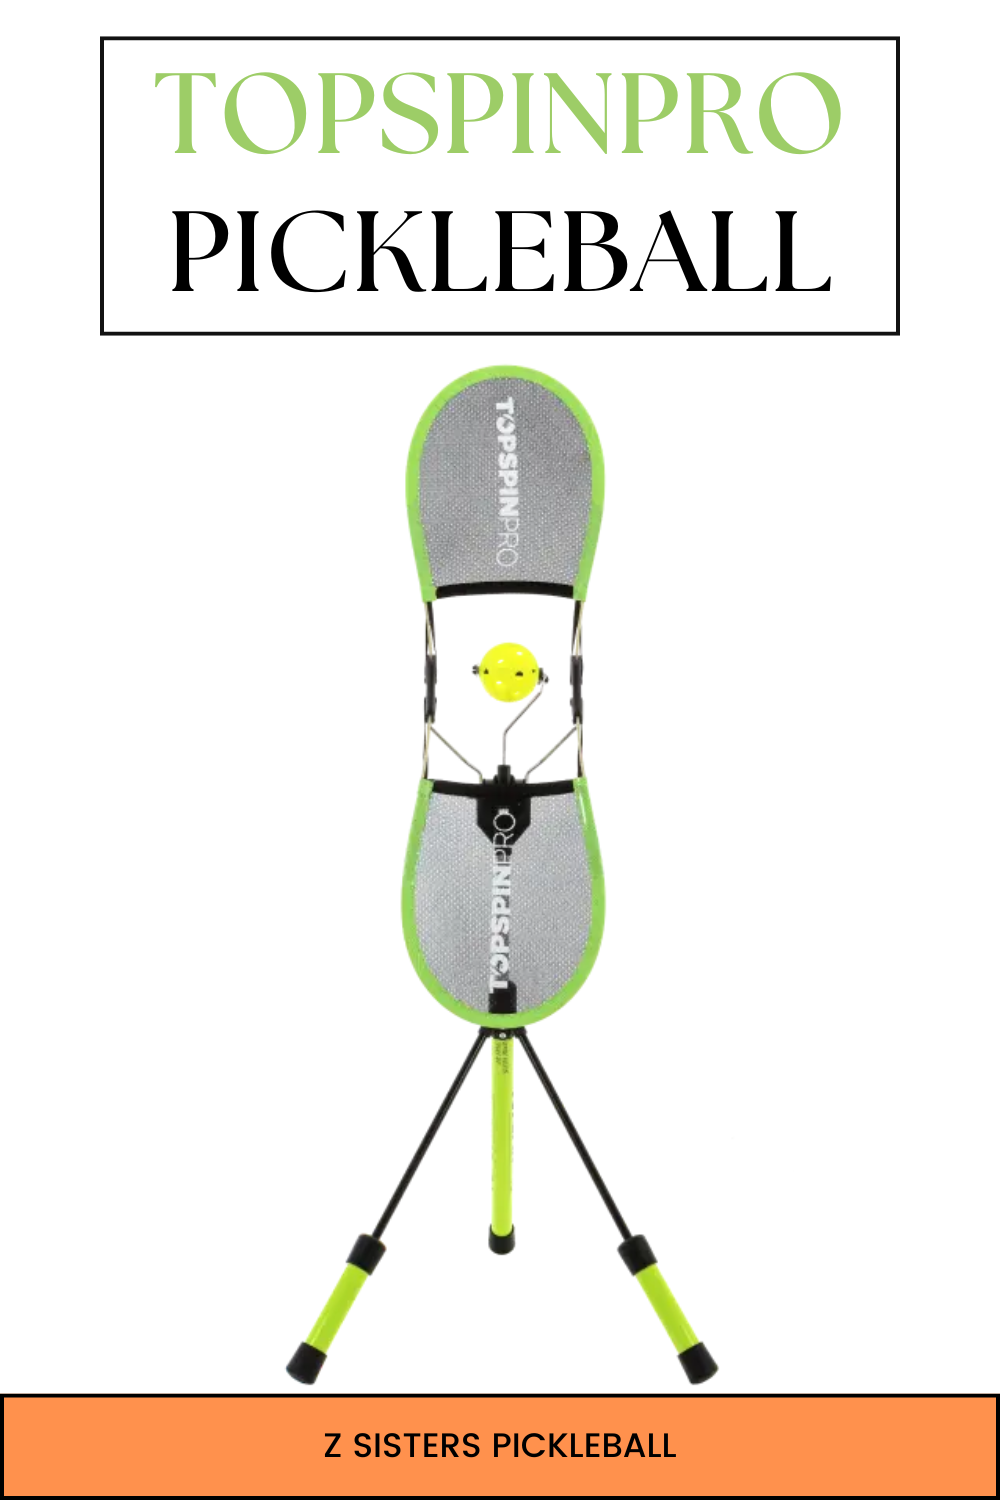 Master Topspin with TopspinPro for Pickleball